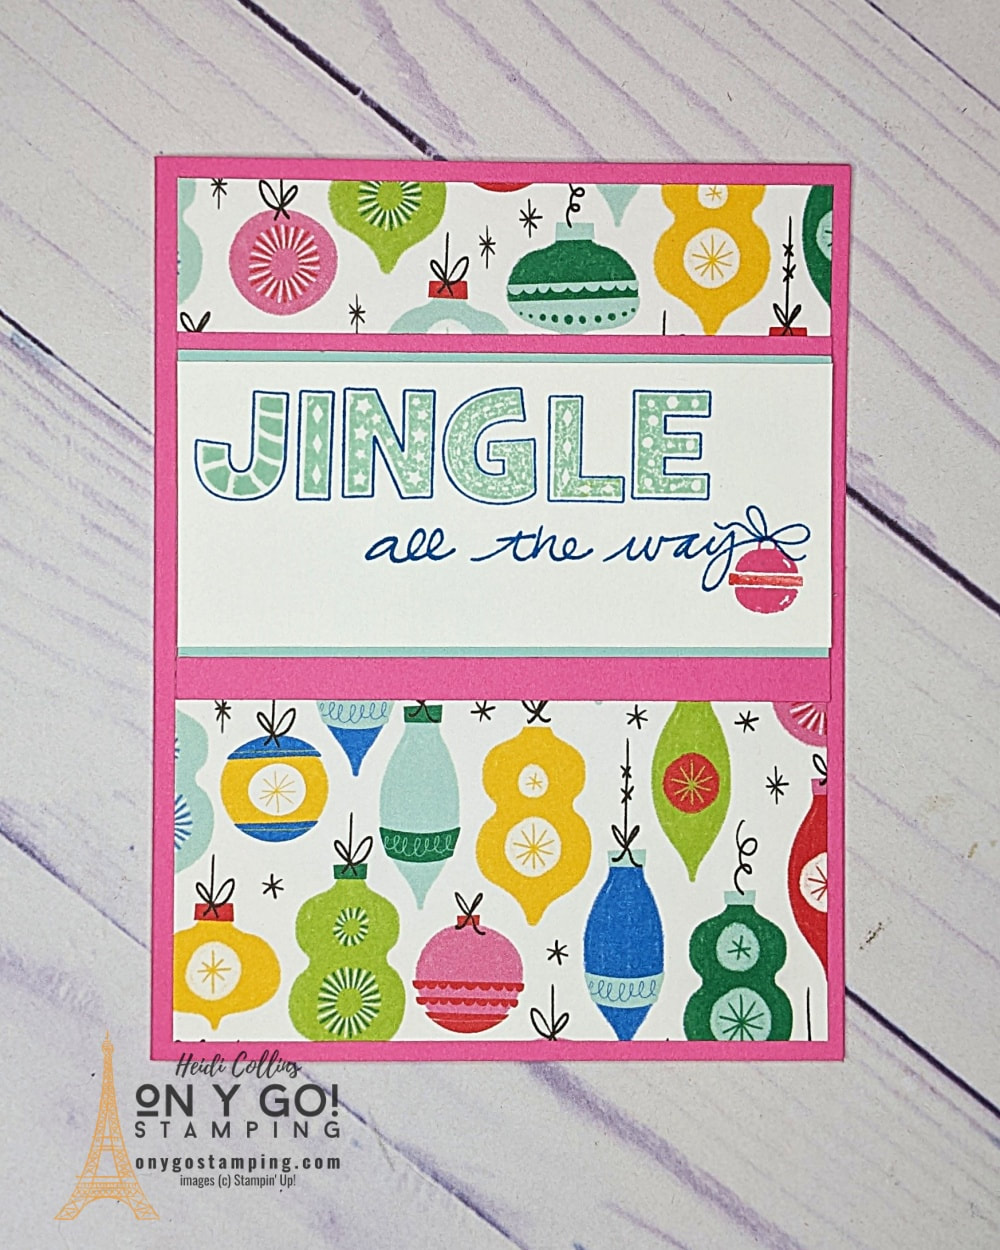 Create a handmade Christmas card with patterned paper and the Jingle Jingle Jingle stamp set from Stampin' Up!®